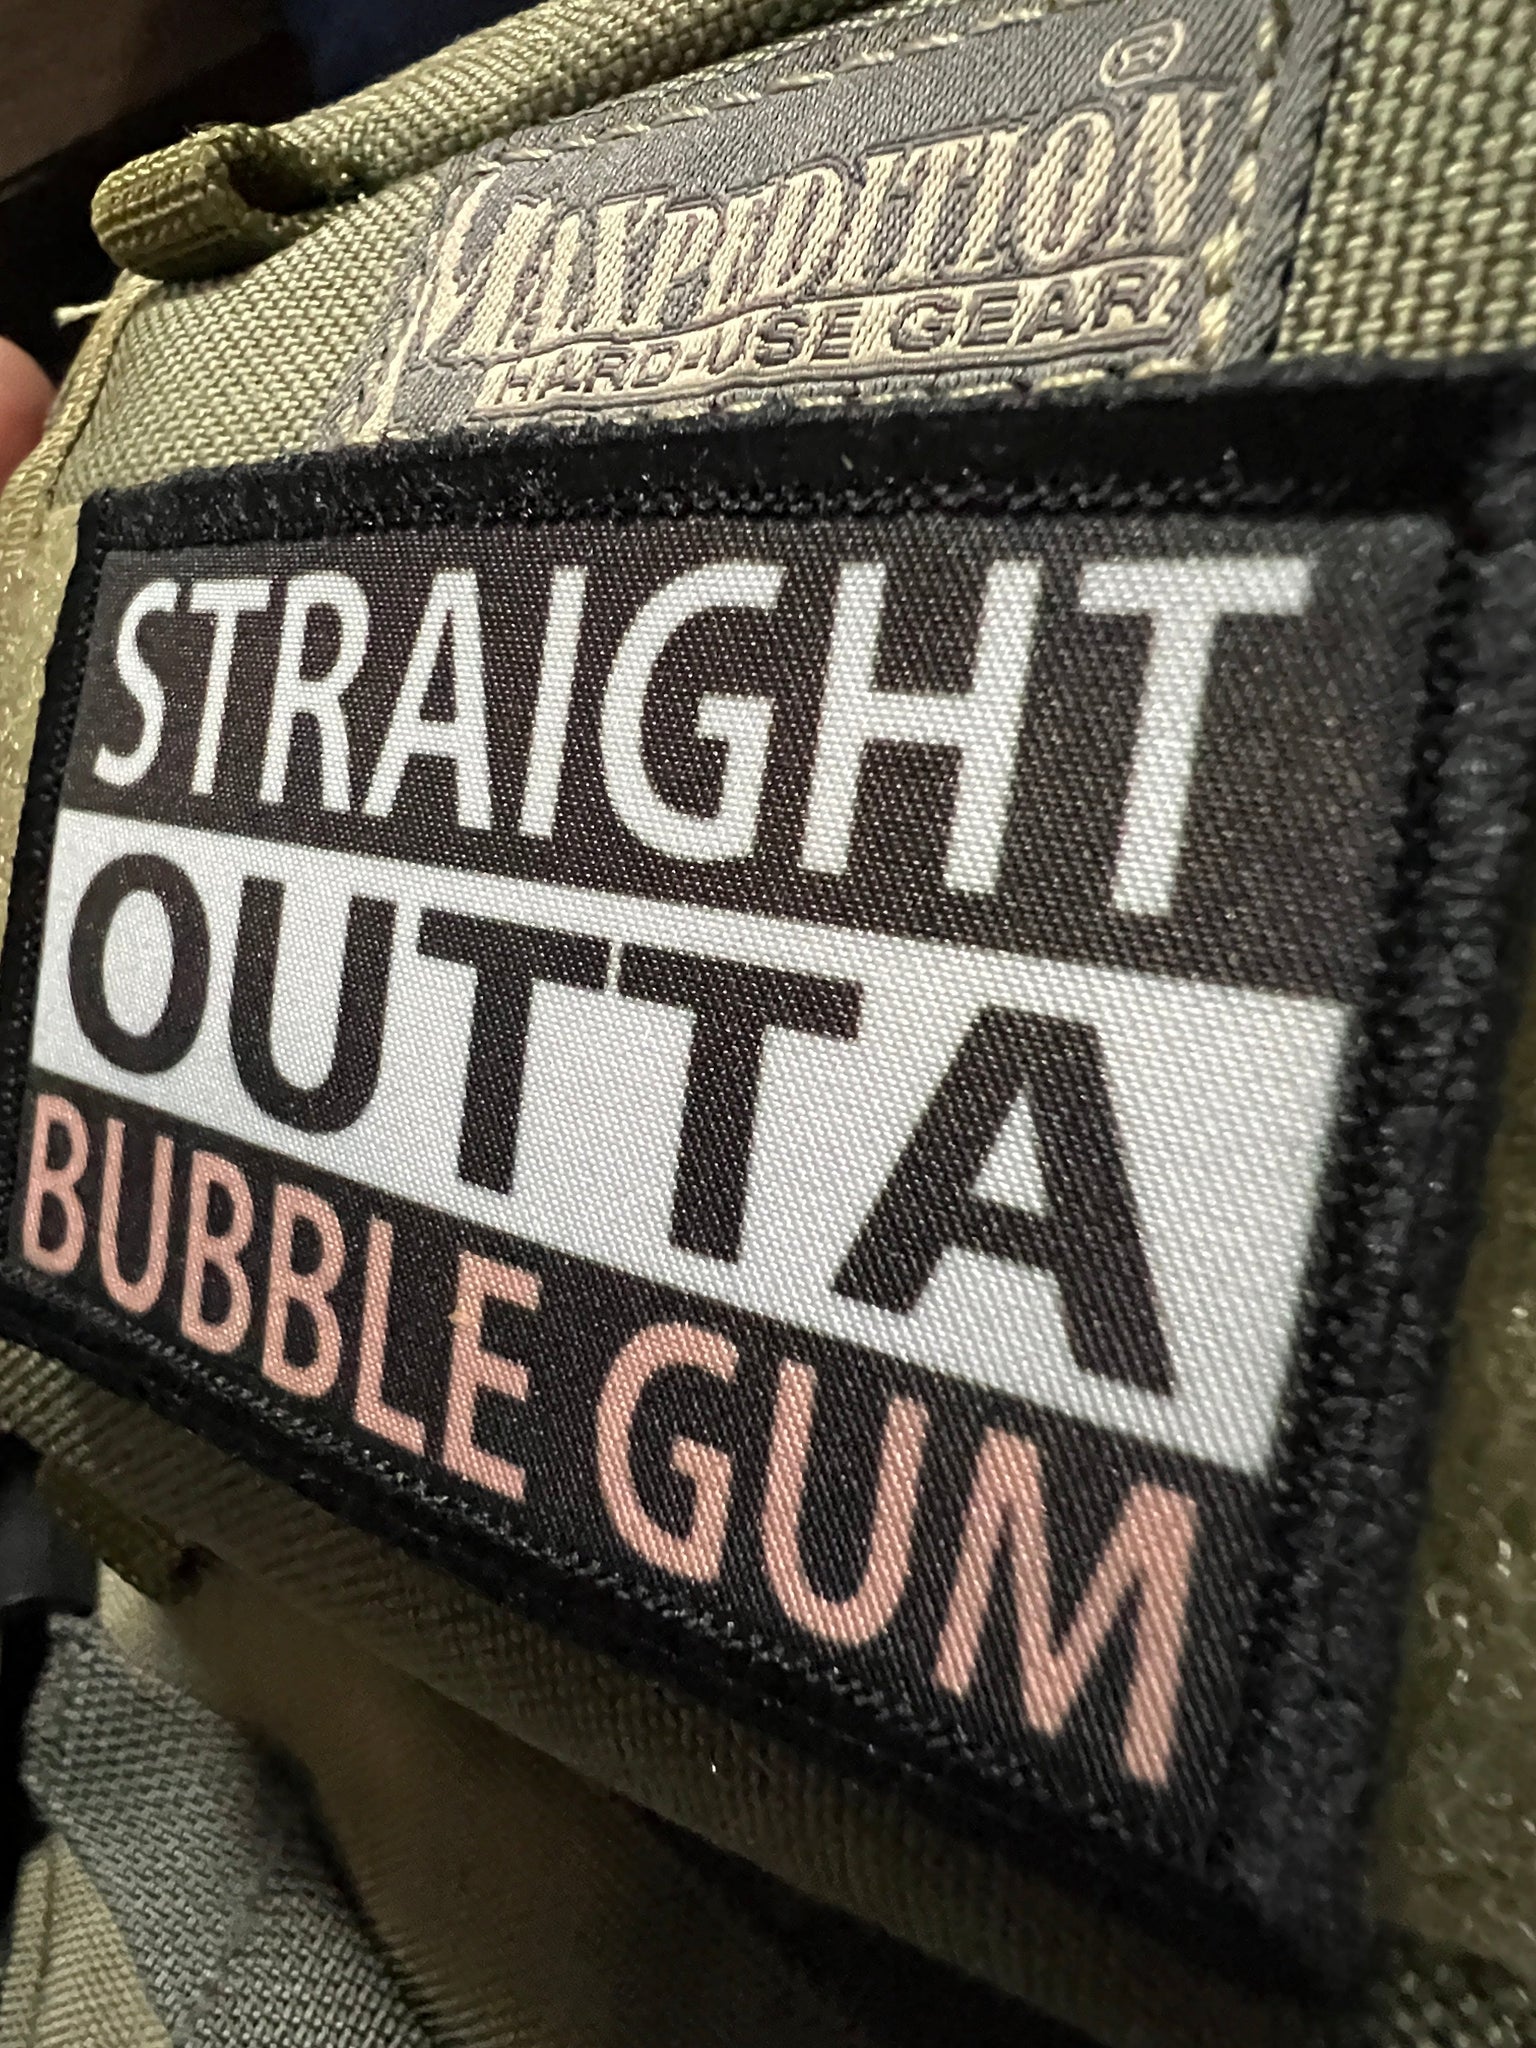 Straight Outta Bubble Gum Morale Patch Morale Patches Redheaded T Shirts 